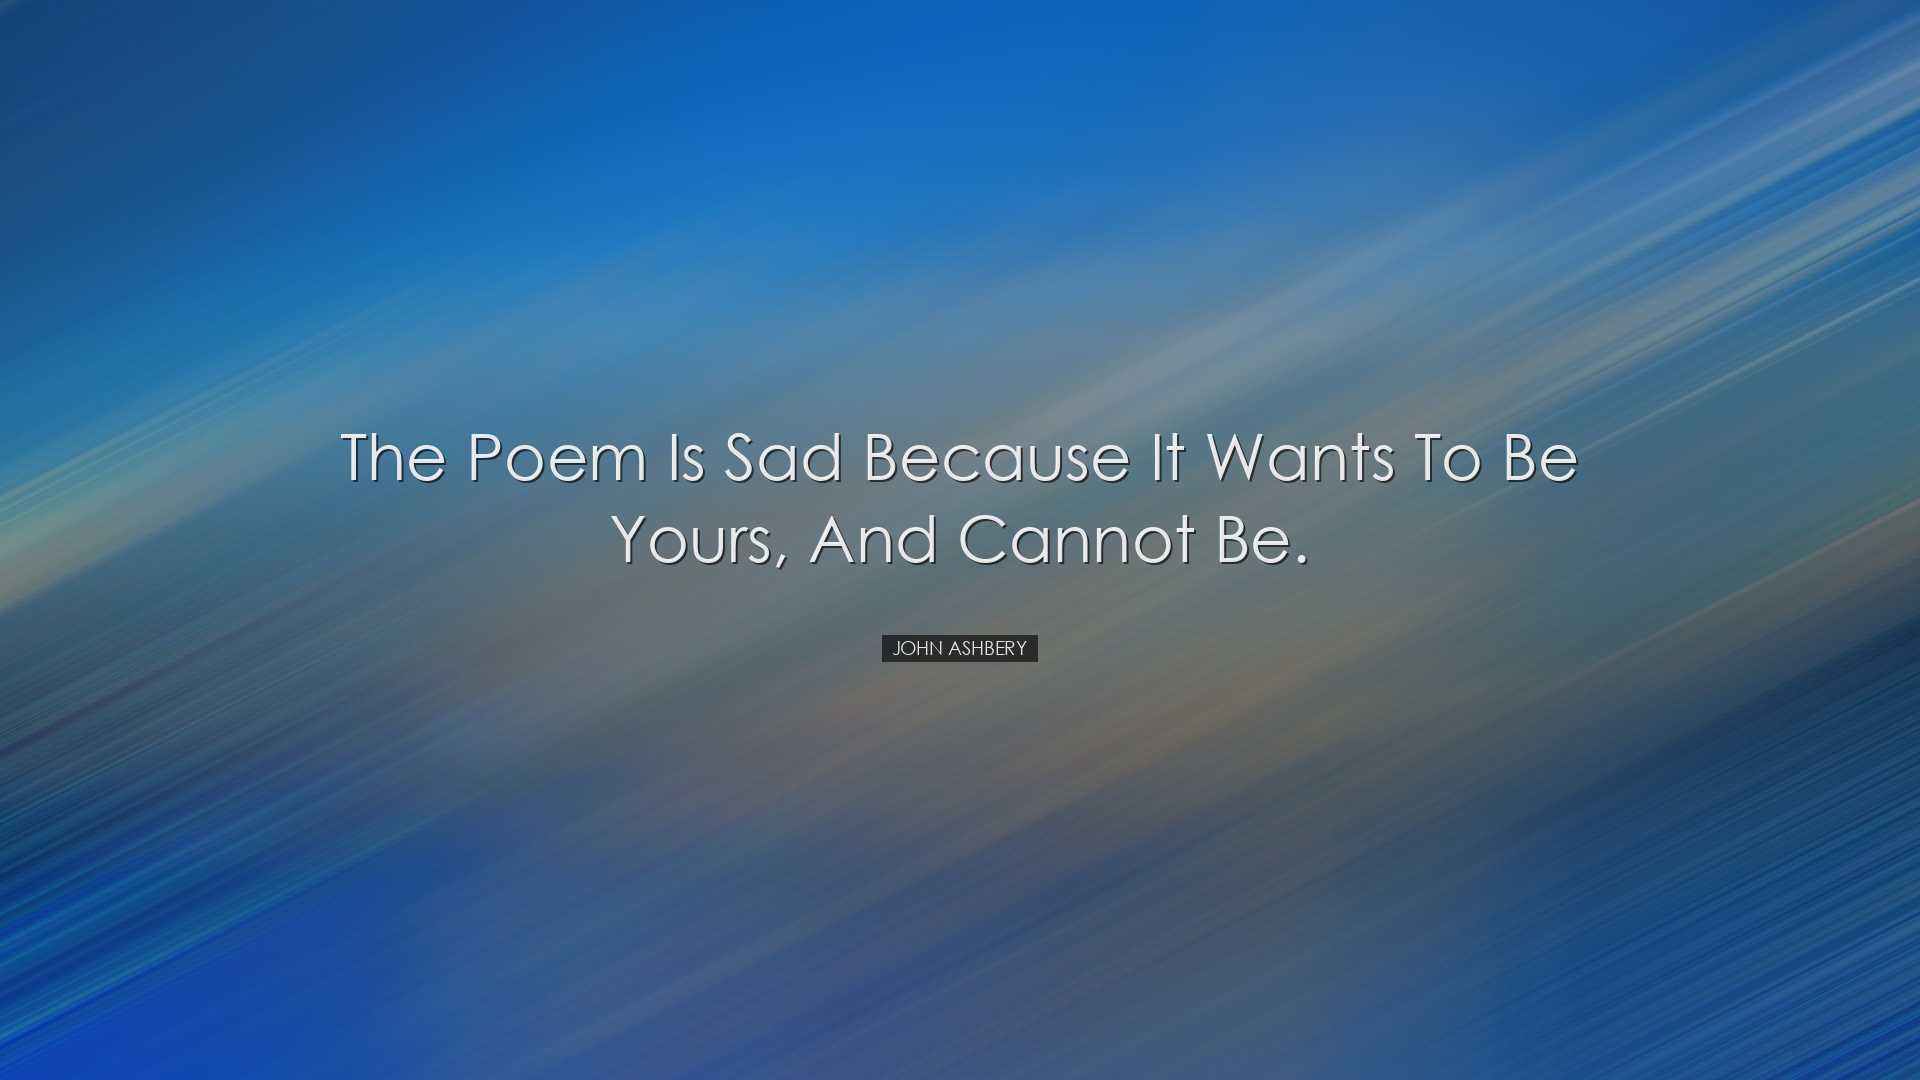 The poem is sad because it wants to be yours, and cannot be. - Joh